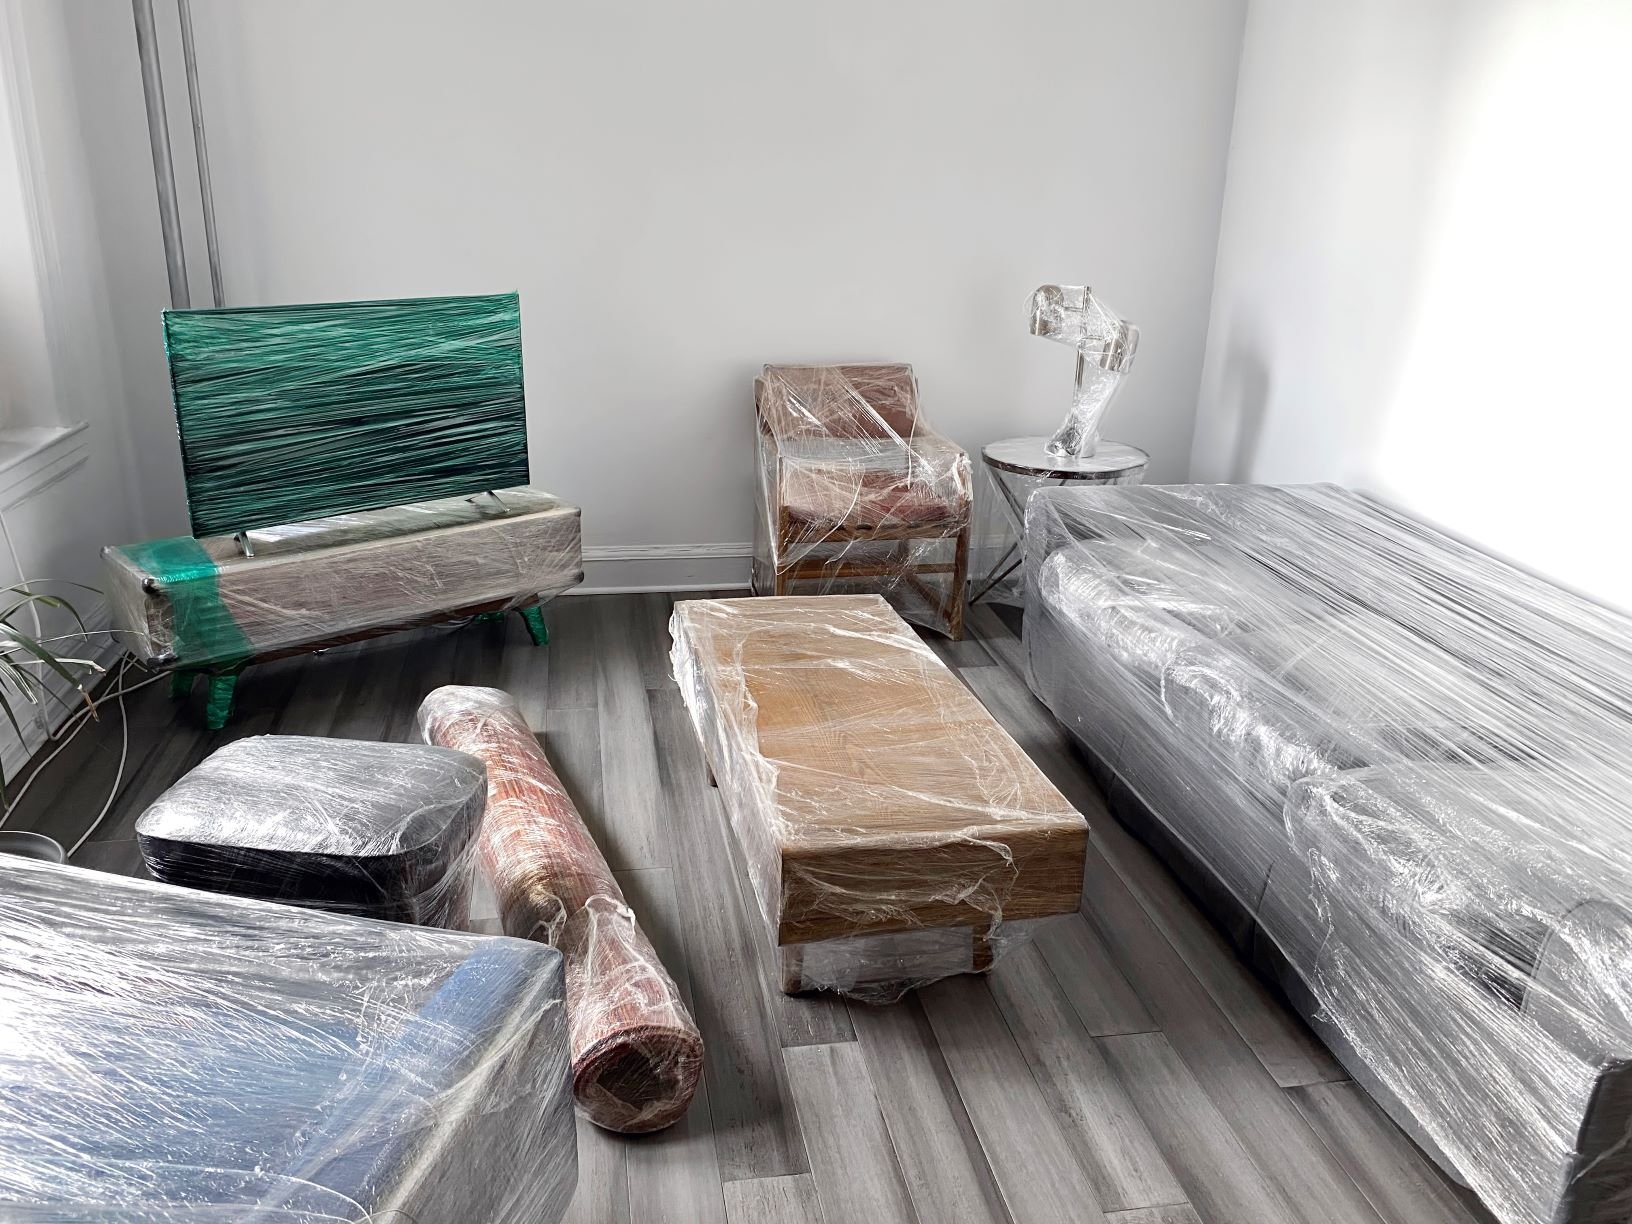 Furniture wrapped for storage